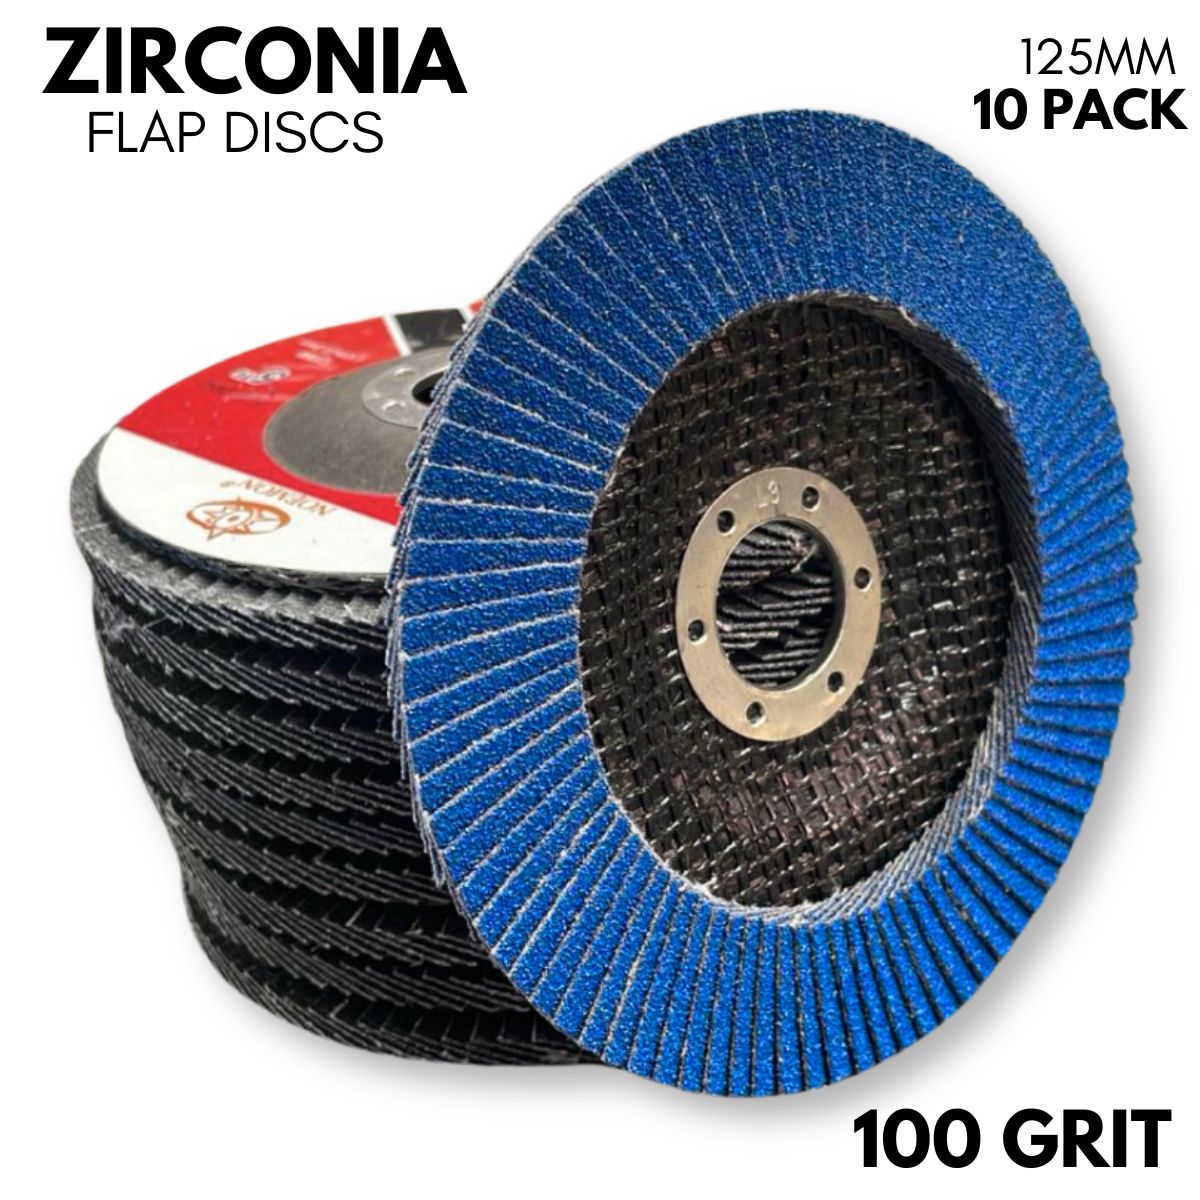 10 Pack | 125mm (5”) Flap Discs | 100 GRIT Zirconia - South East Clearance Centre